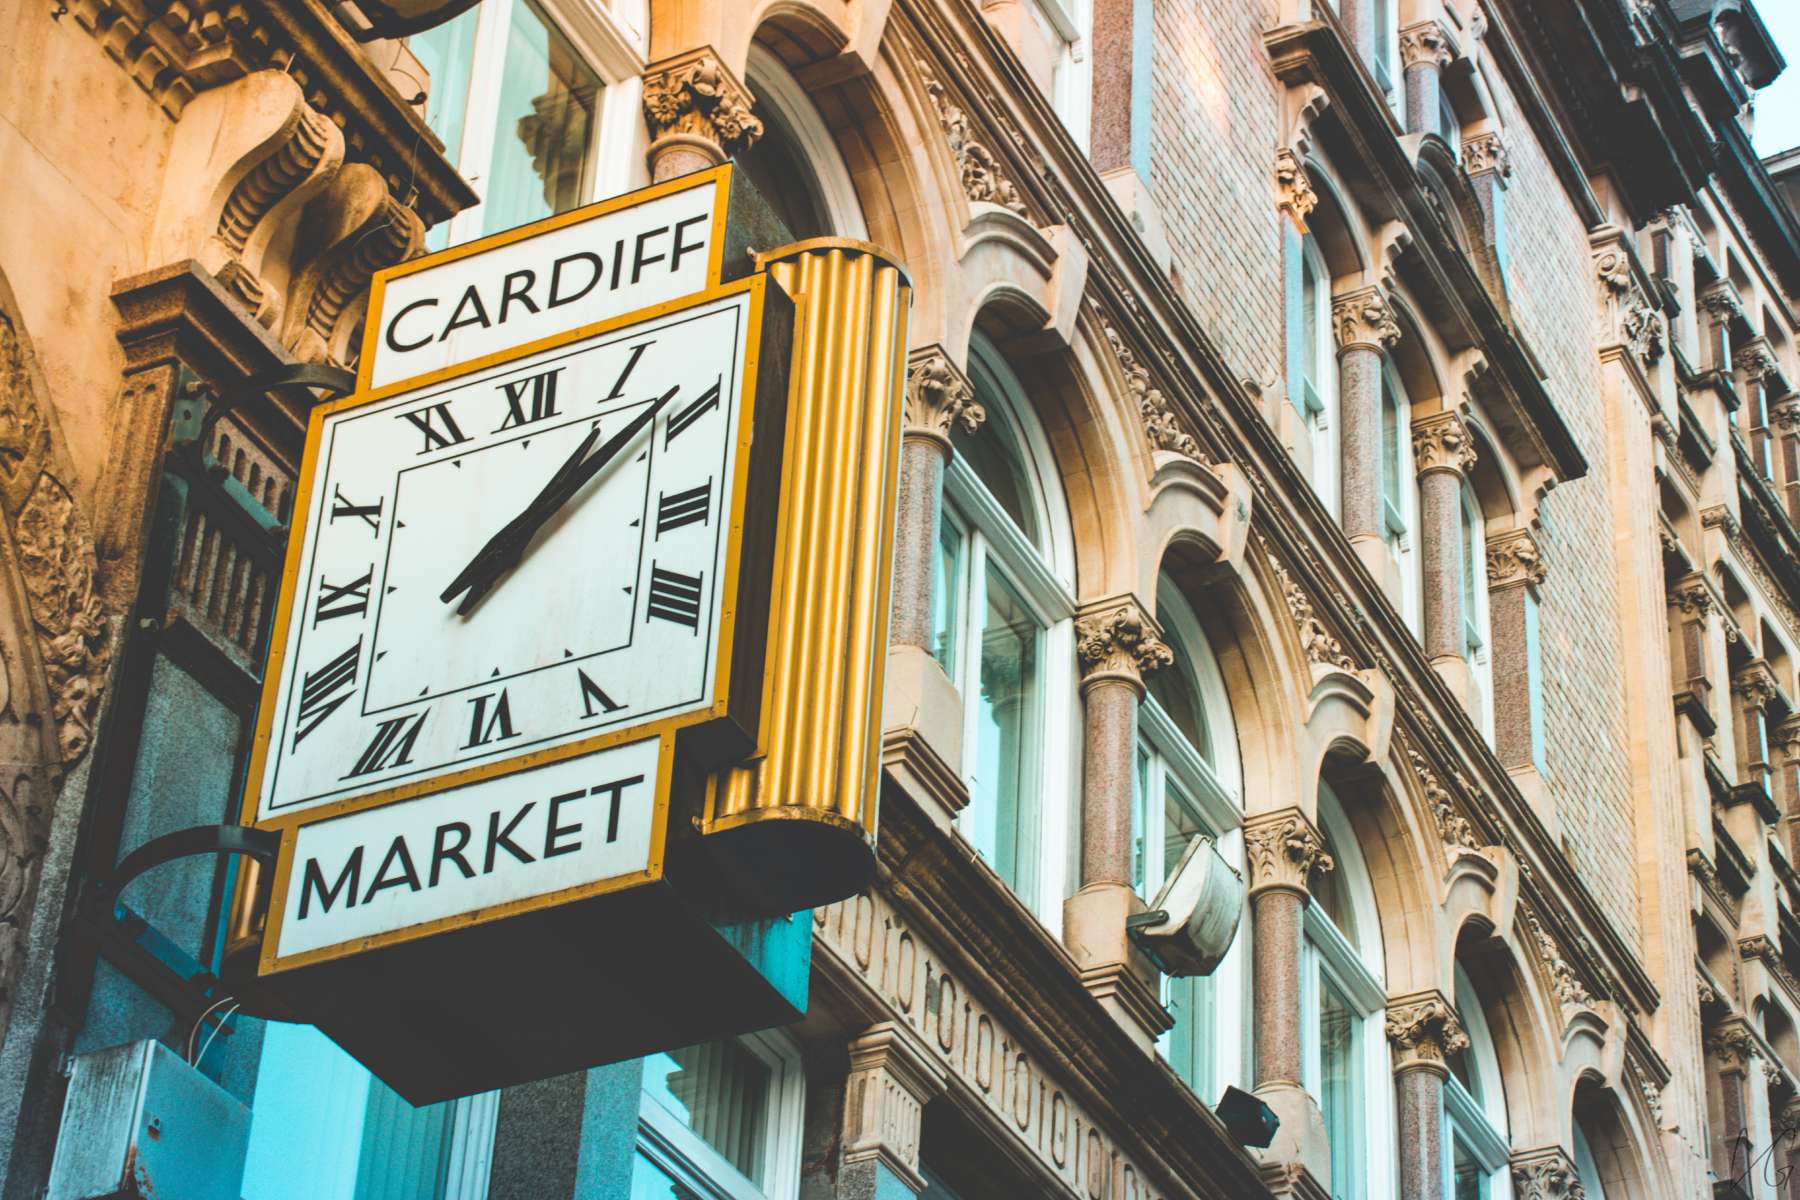 Image of the clock and facade of Cardiff Central Market (Image: Andrewjcg/Shutterstock)